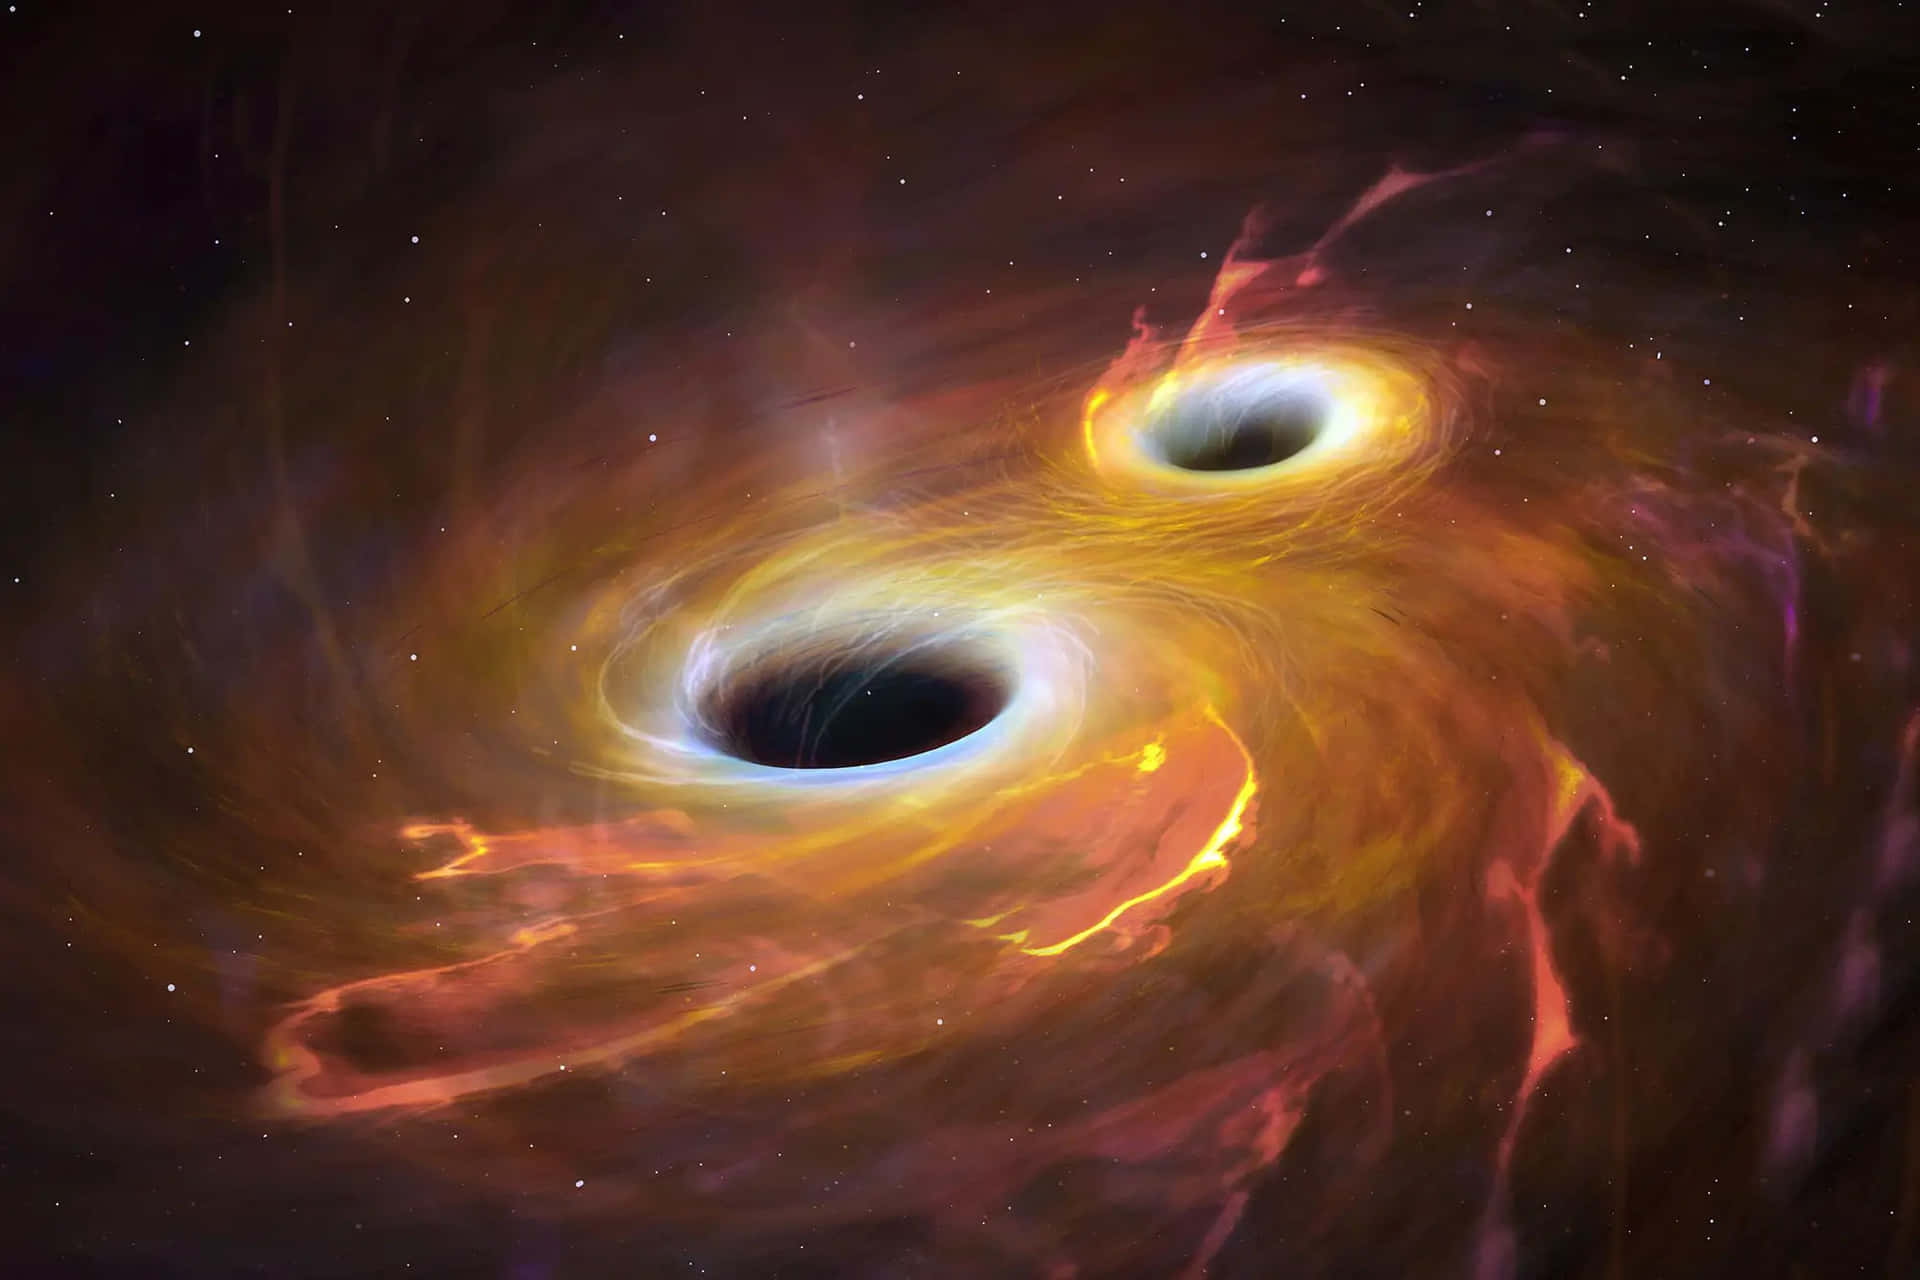 A black hole captured by the Hubble Telescope